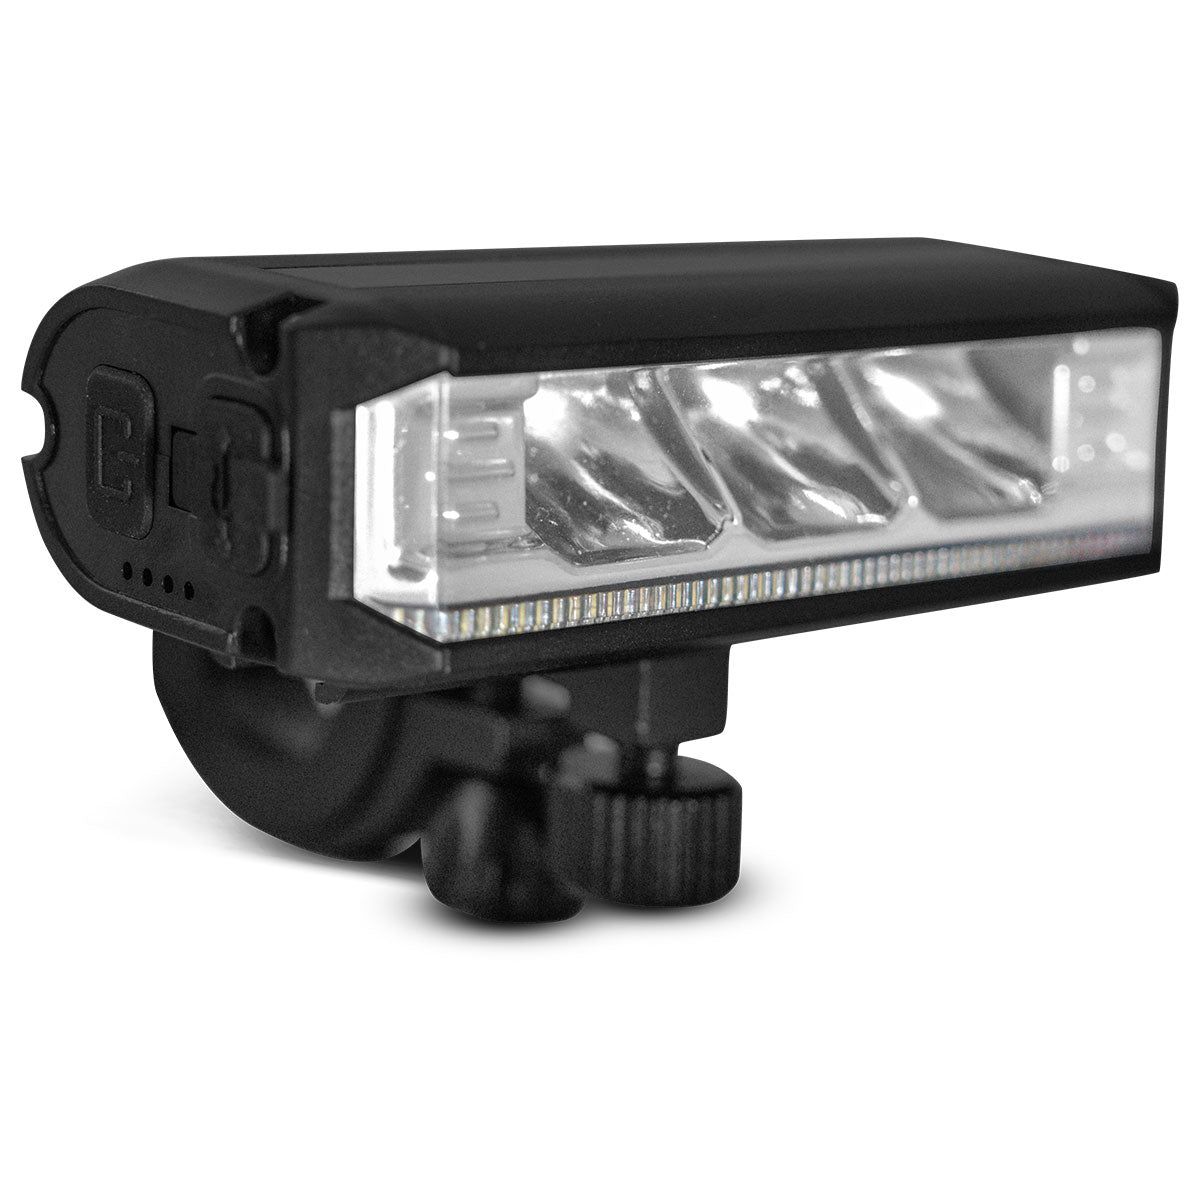 Progear Ultra Bright LED Rechargeable Front Light